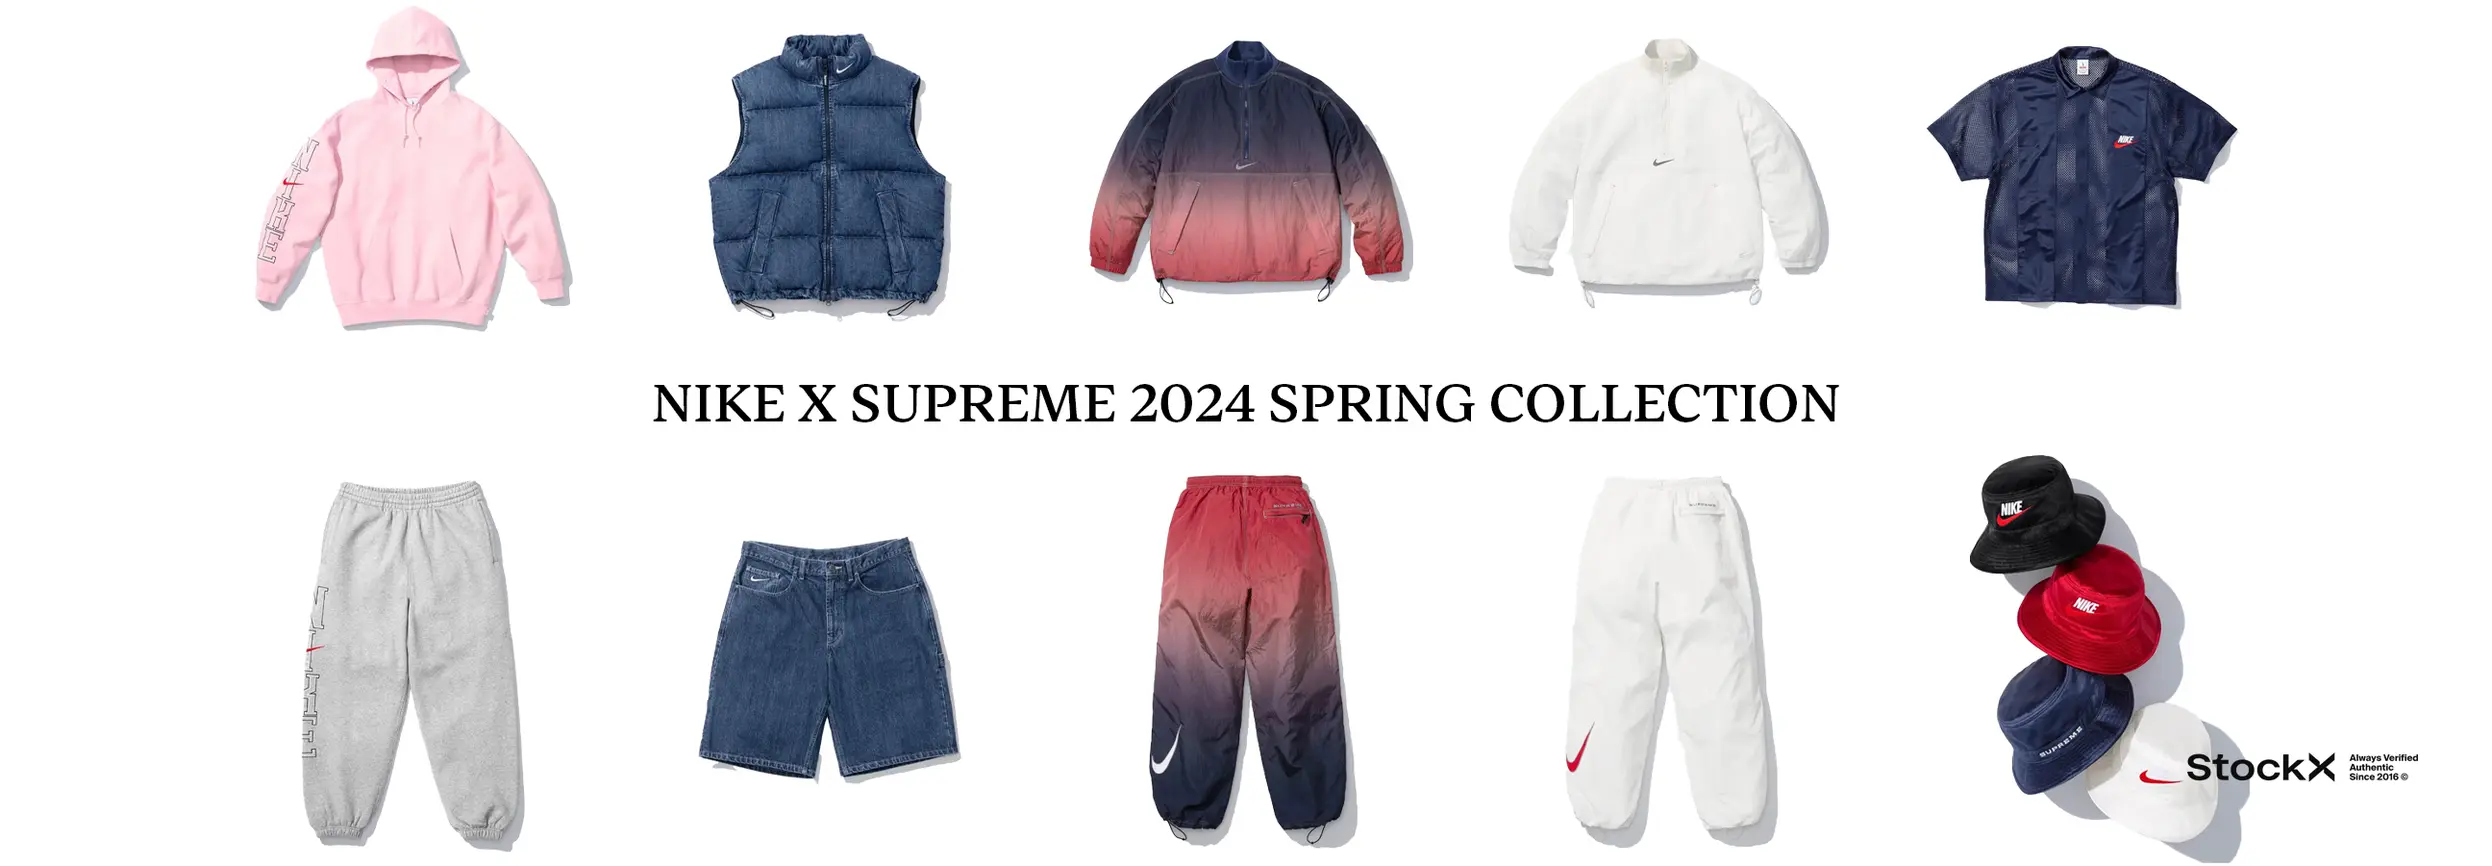 [WEB]NIKE_X_SUPREME_2024_SPRING_COLLECTION.png